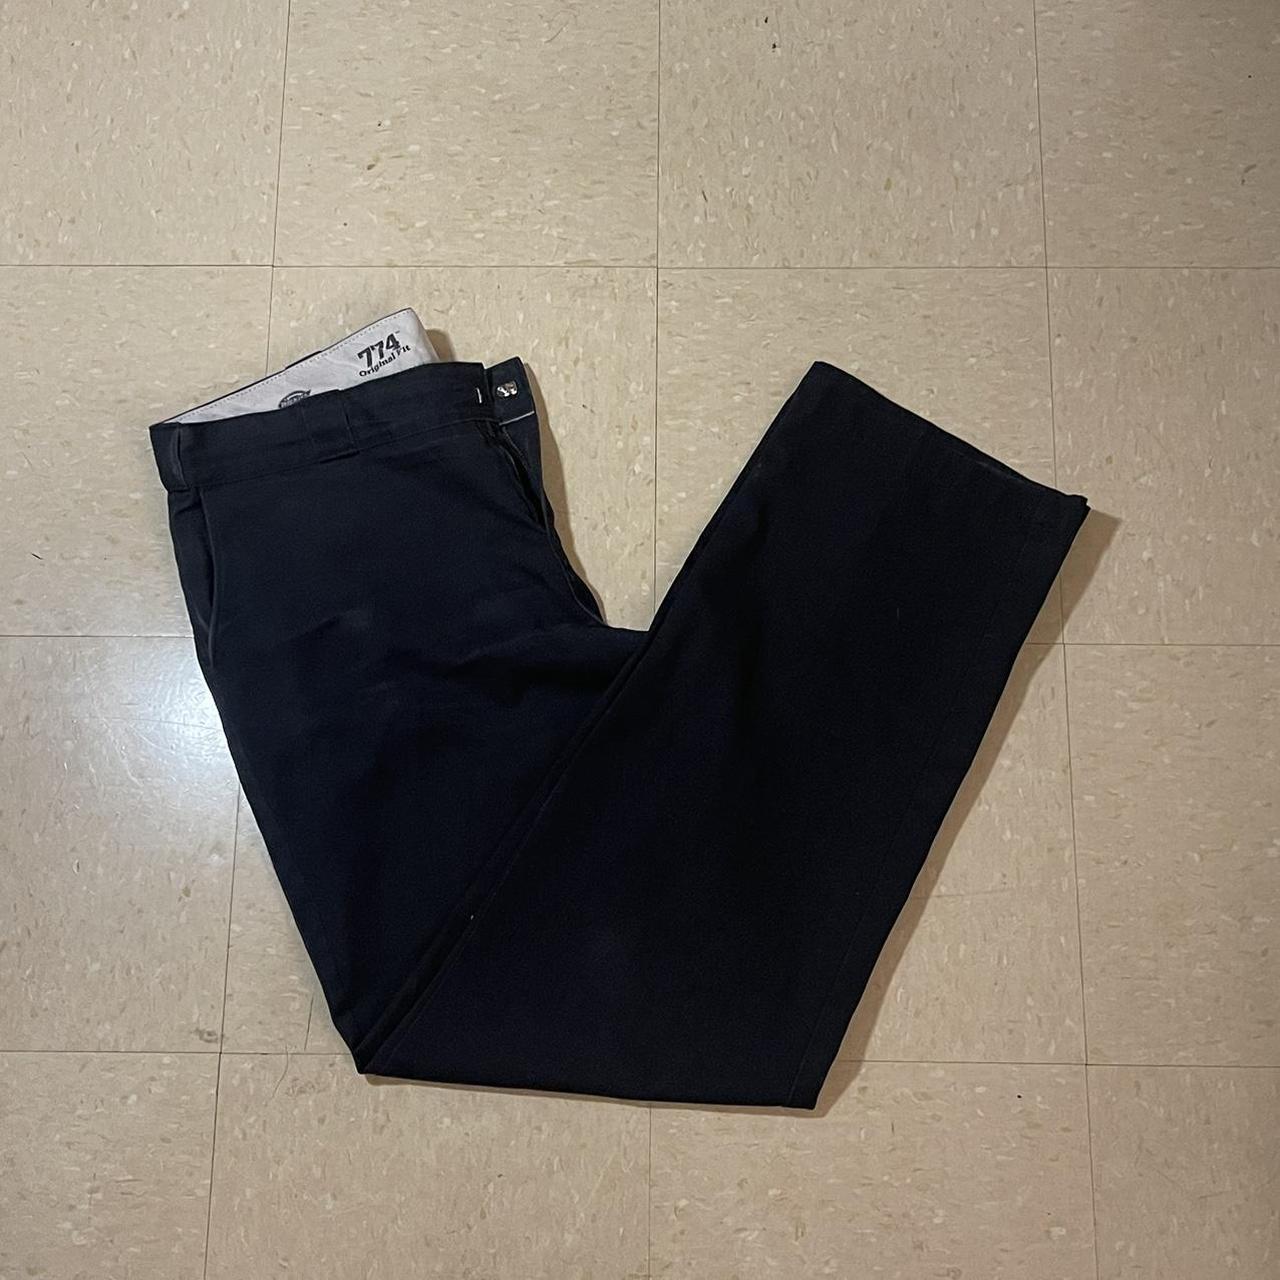 Dickie's 774 pants. Has some distress marks along - Depop